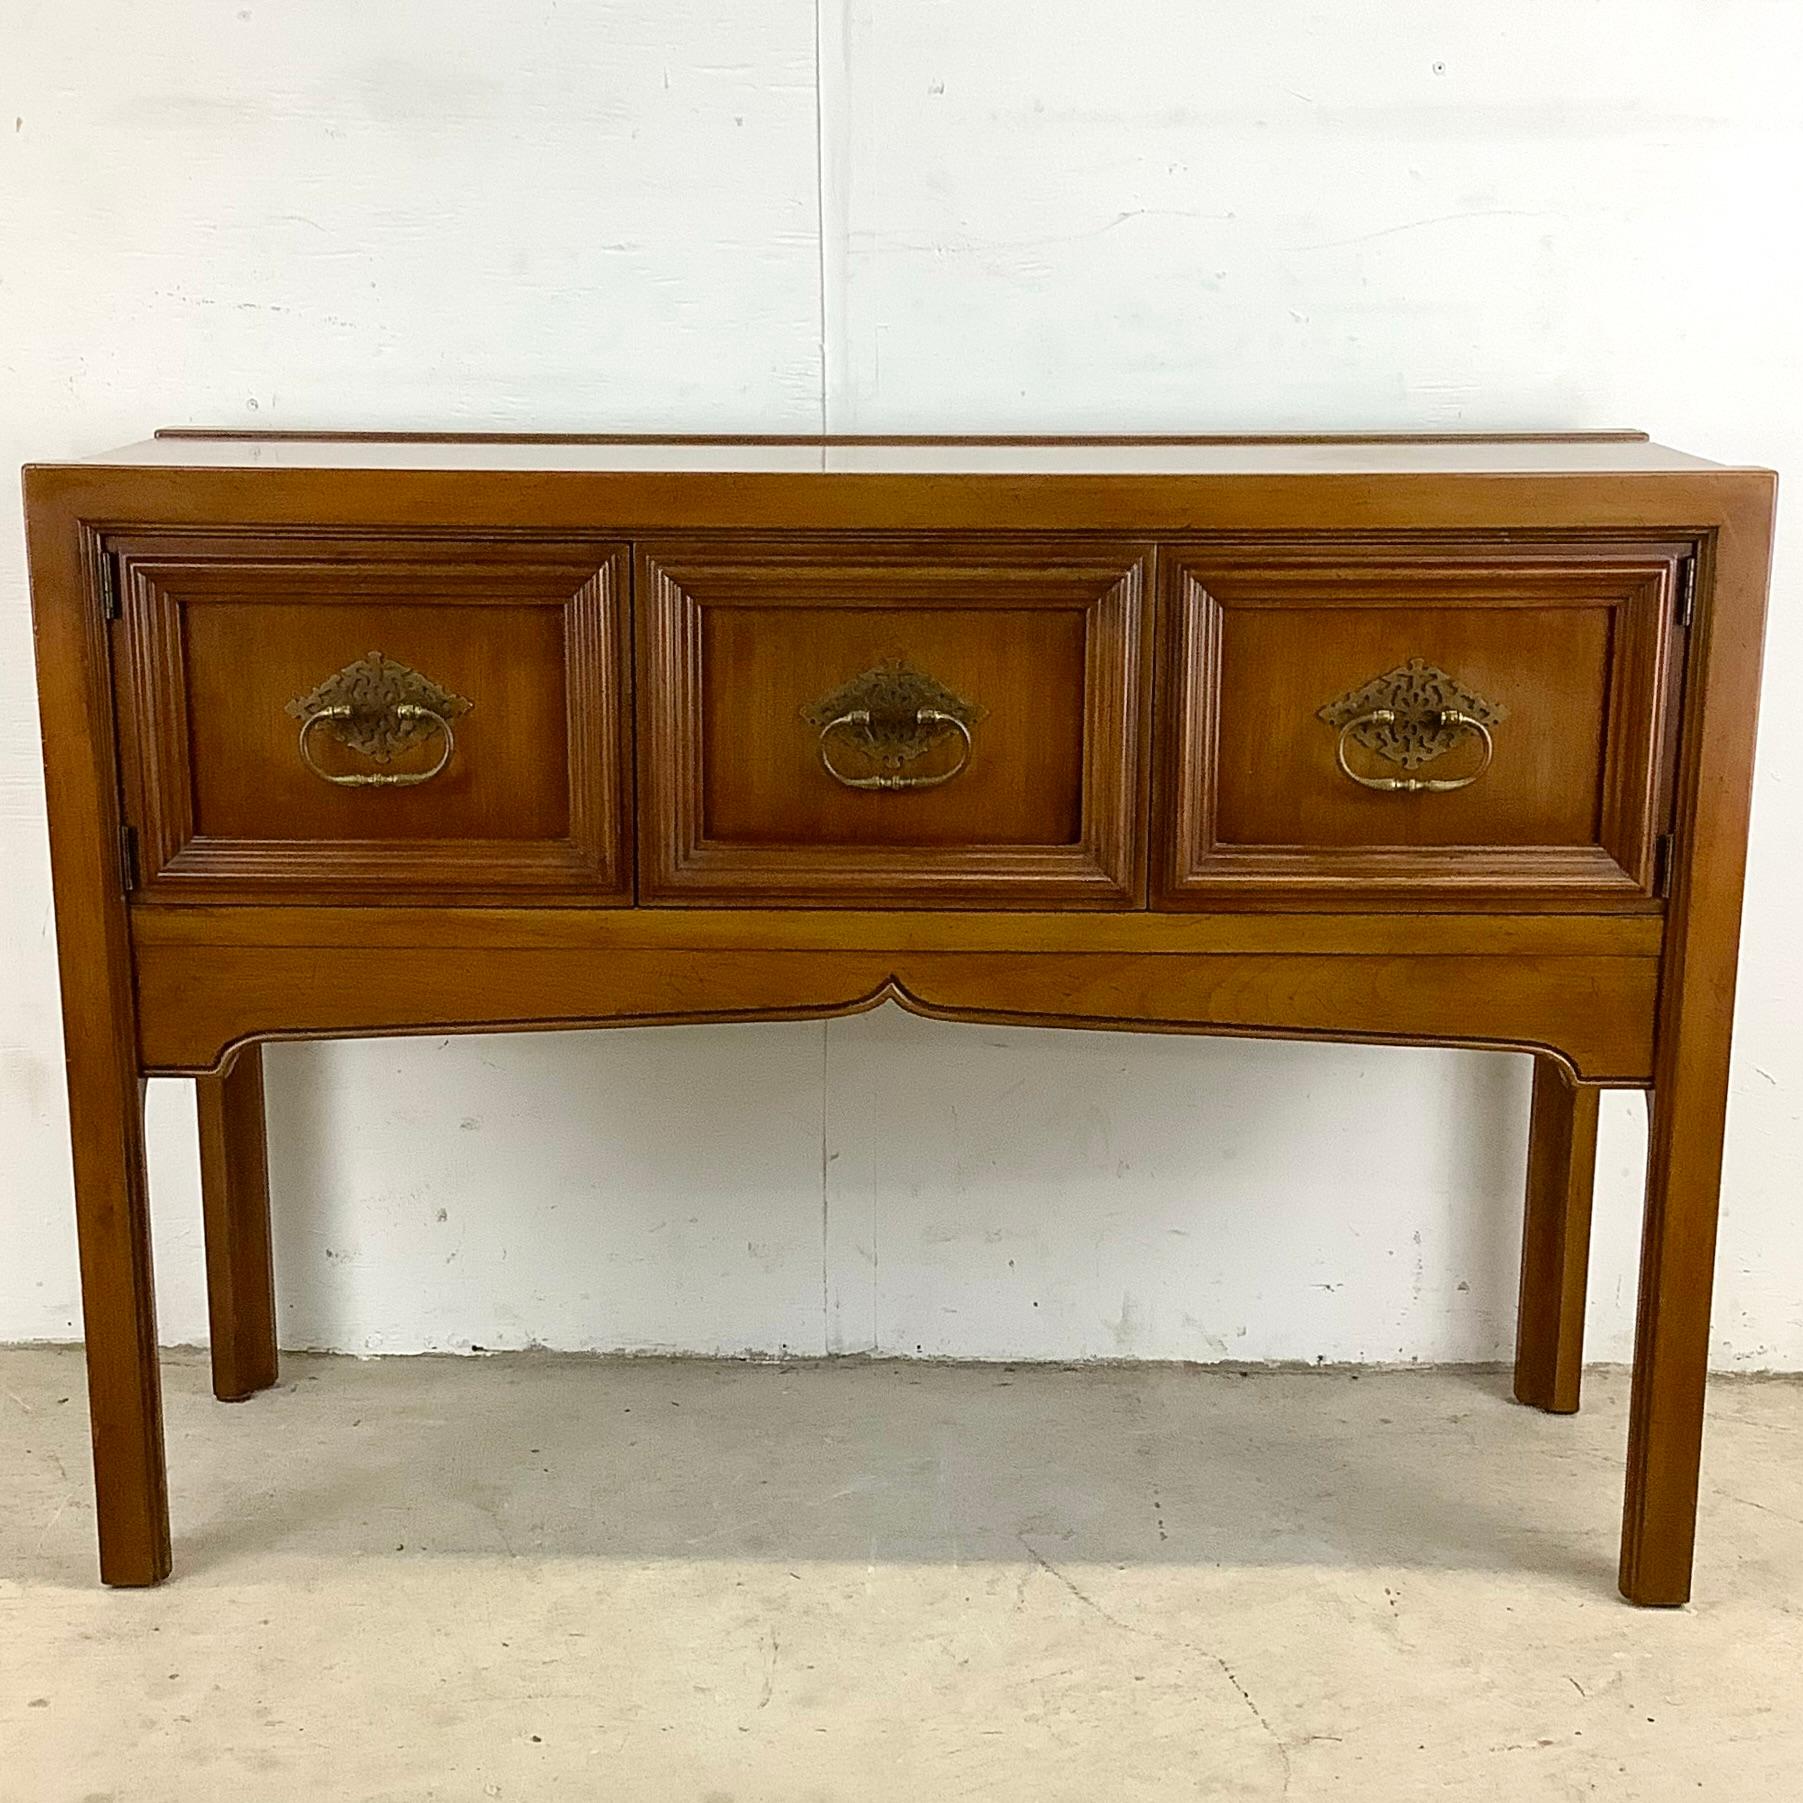 Introducing this remarkable Vintage Walnut Console Cabinet, a timeless piece that combines vintage allure with functional design. This stunning cabinet showcases the craftsmanship and elegance that vintage American furniture is renowned